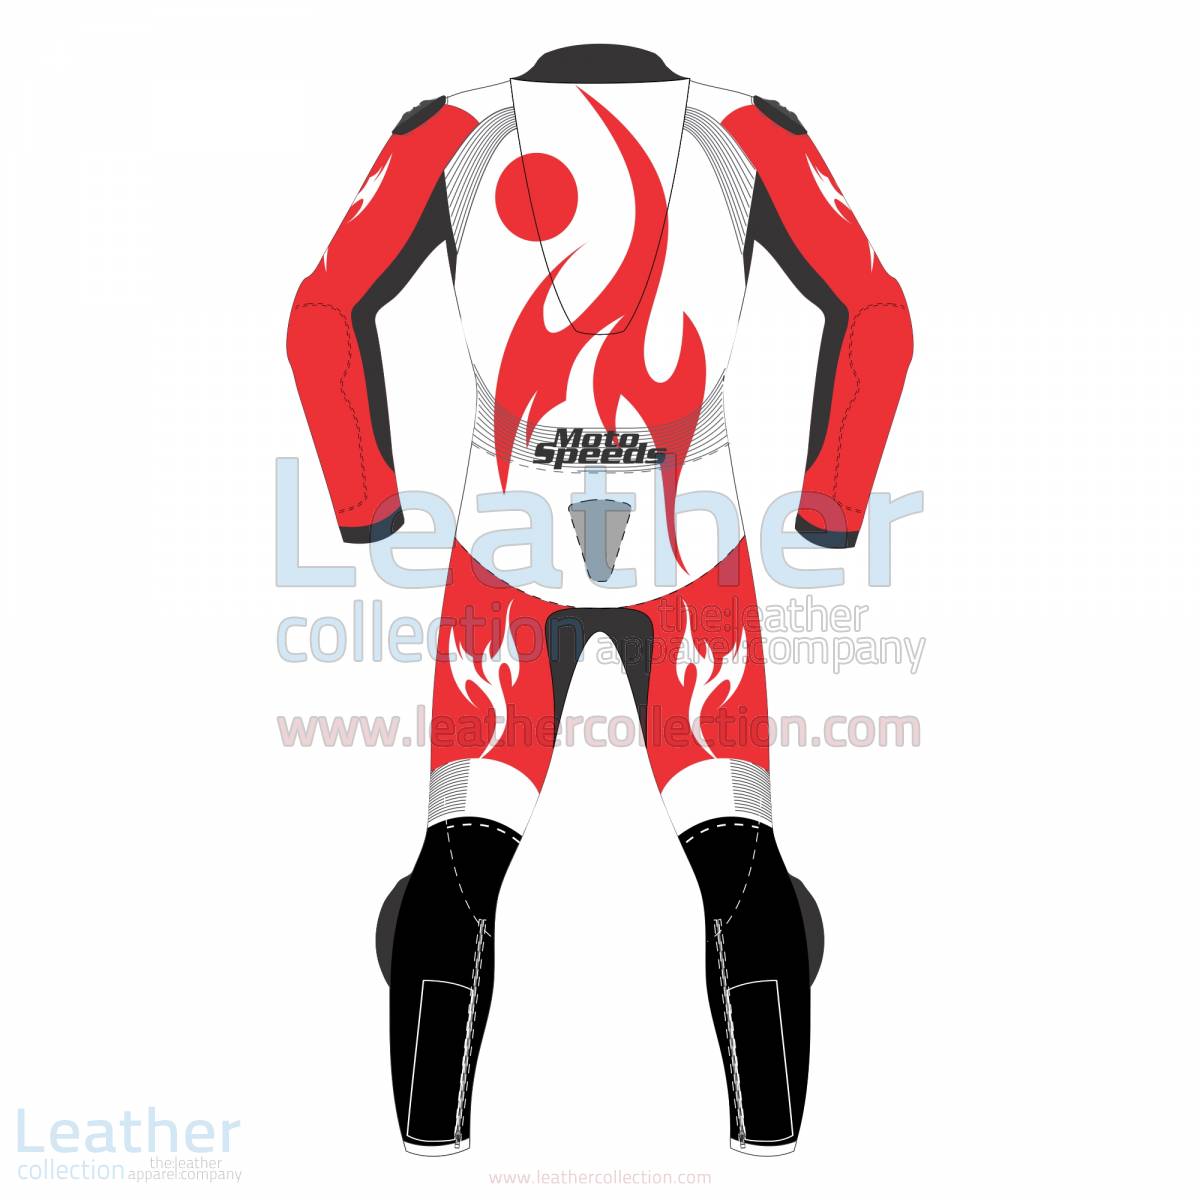 Motorcylce Red Eagle Logo - Order Red Eagle Motorcycle Racing Leathers for $725.00